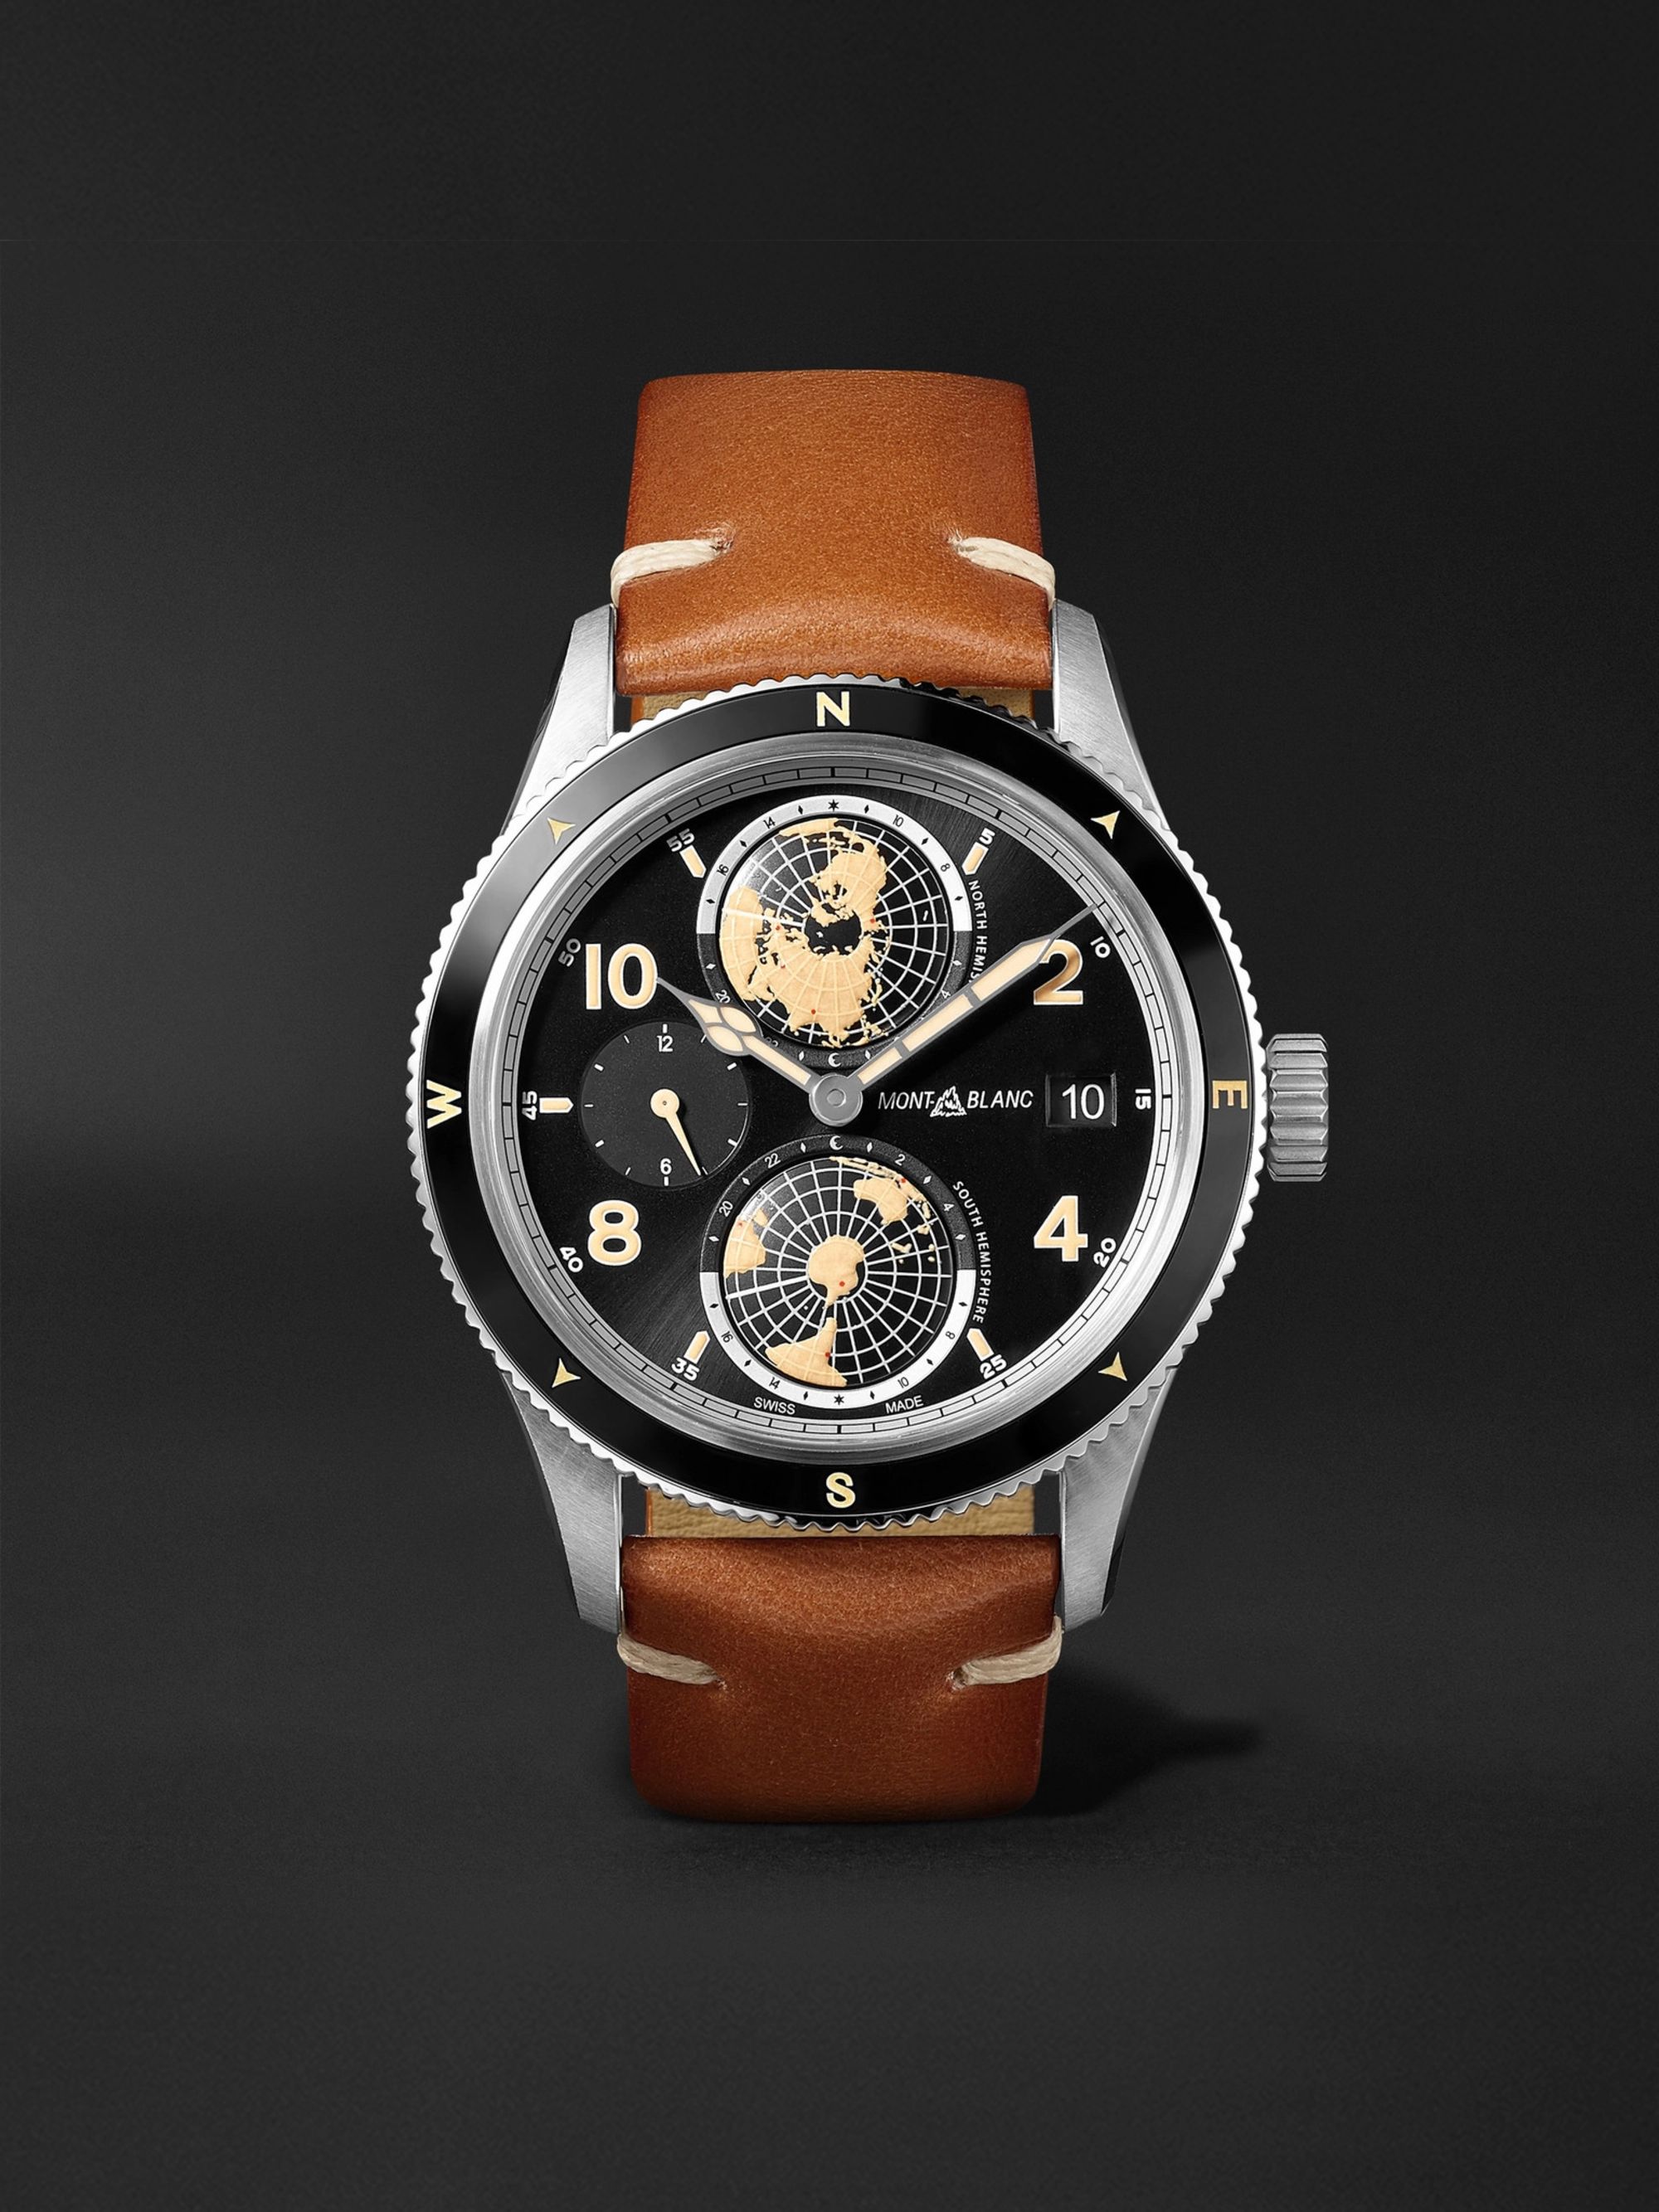 MONTBLANC 1858 Geosphere Automatic GMT 42mm Stainless Steel, Ceramic and Leather Watch, Ref. No. 119286